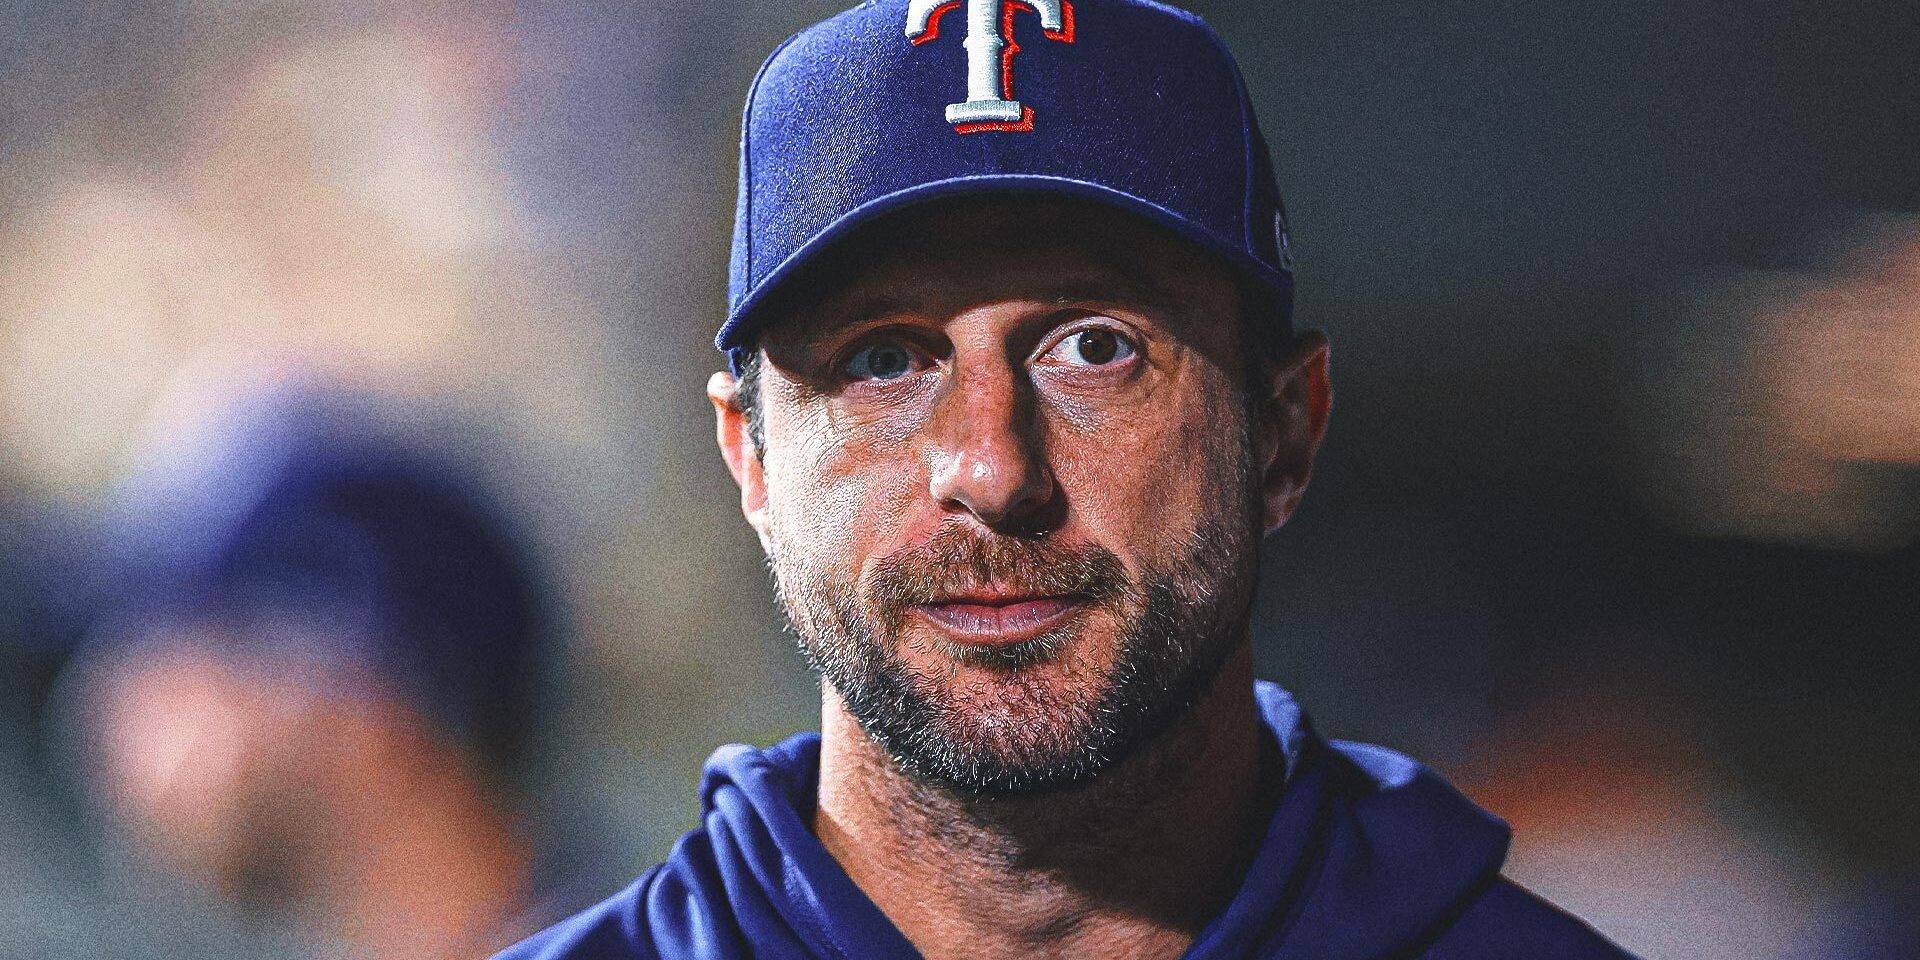 Rangers' Max Scherzer says he's 'ready to go' after bullpen session